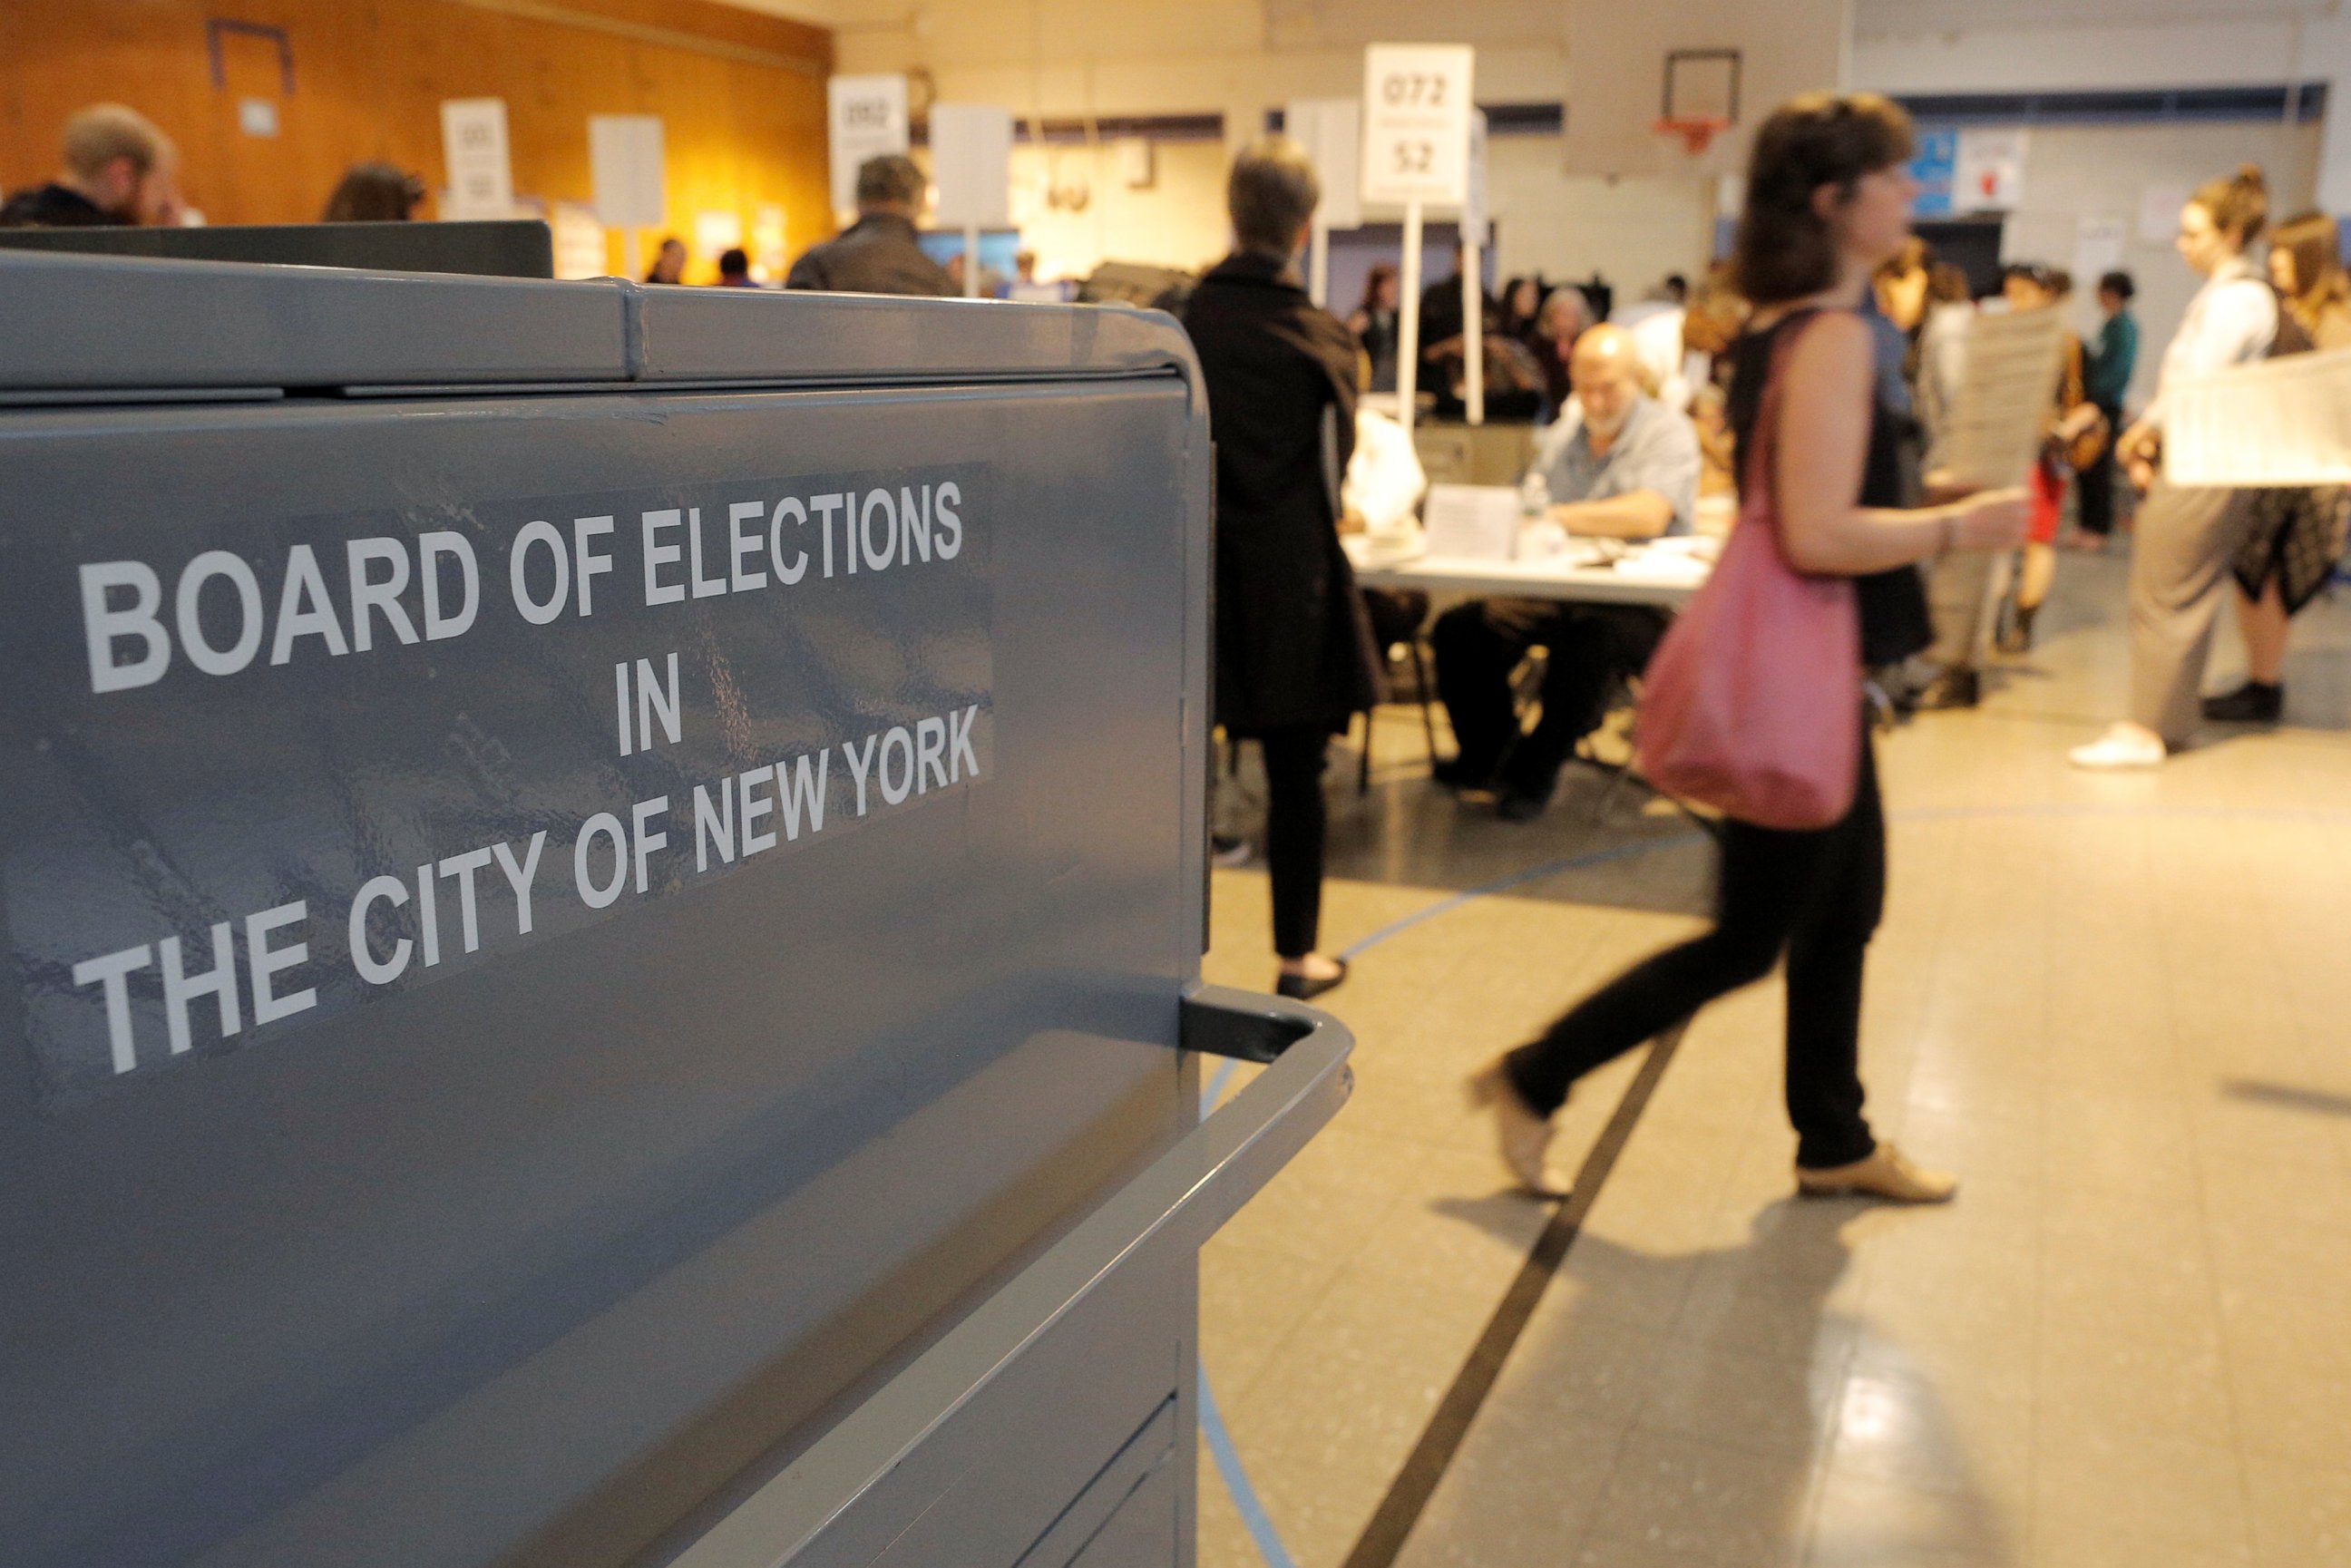 PHOTO: People vote in the New York primary elections at a polling station in the Brooklyn borough of New York, April 19, 2016.  